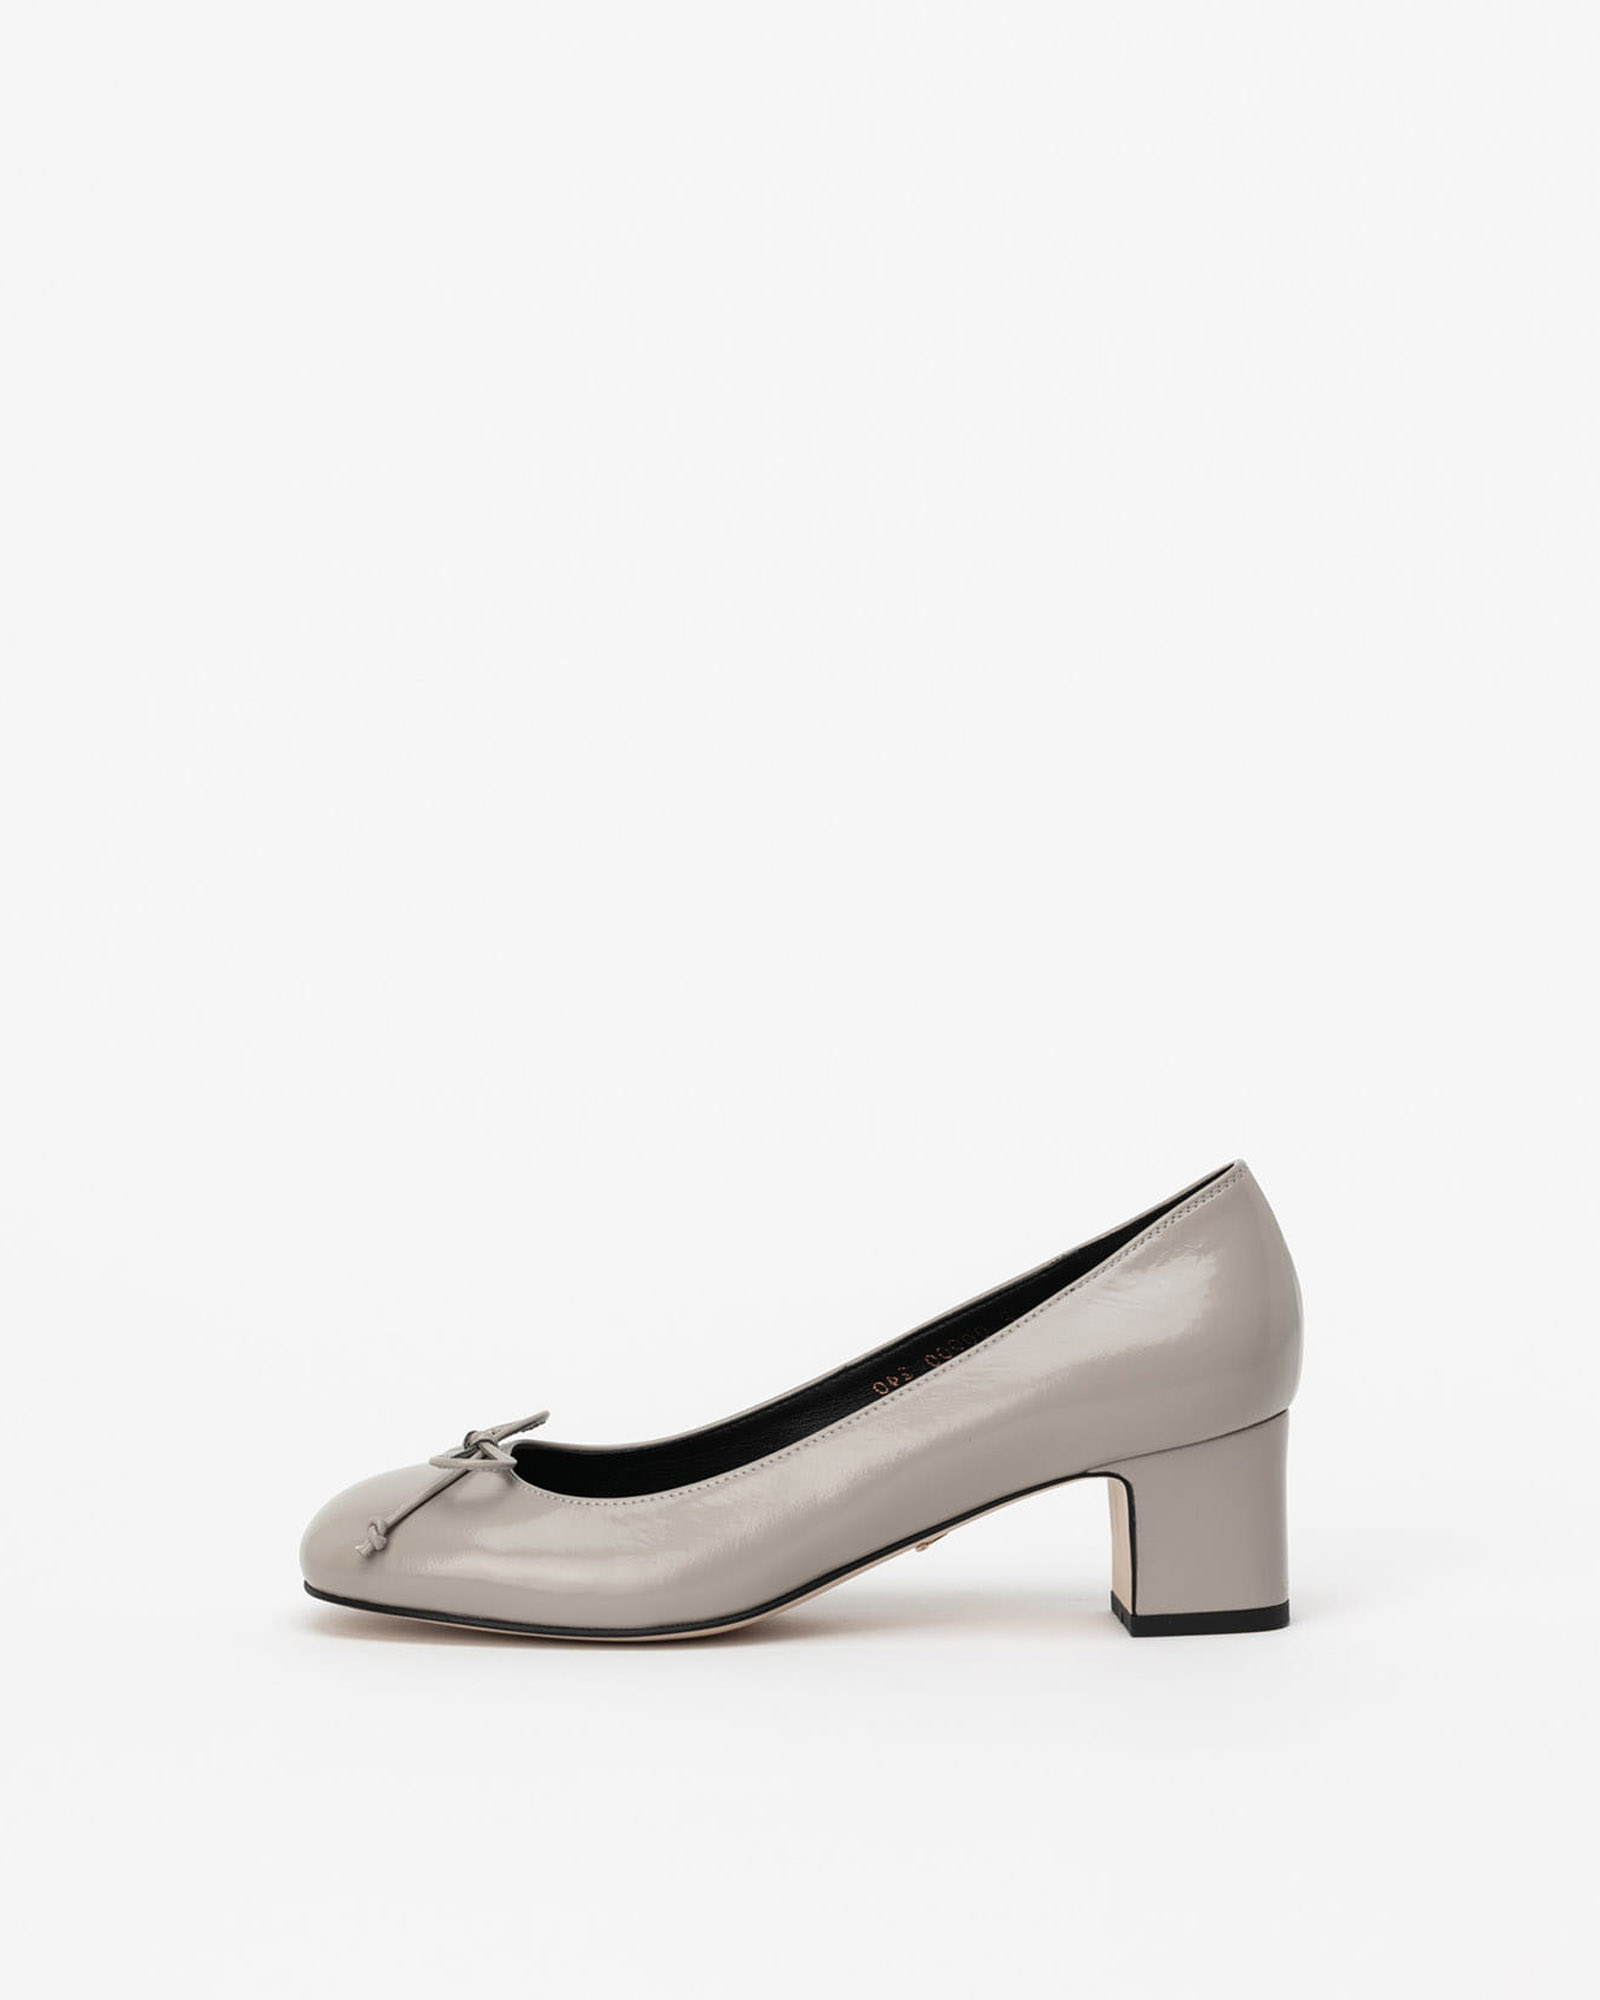 Adore Ribbon Pumps in Wrinkled Dove Gray Box